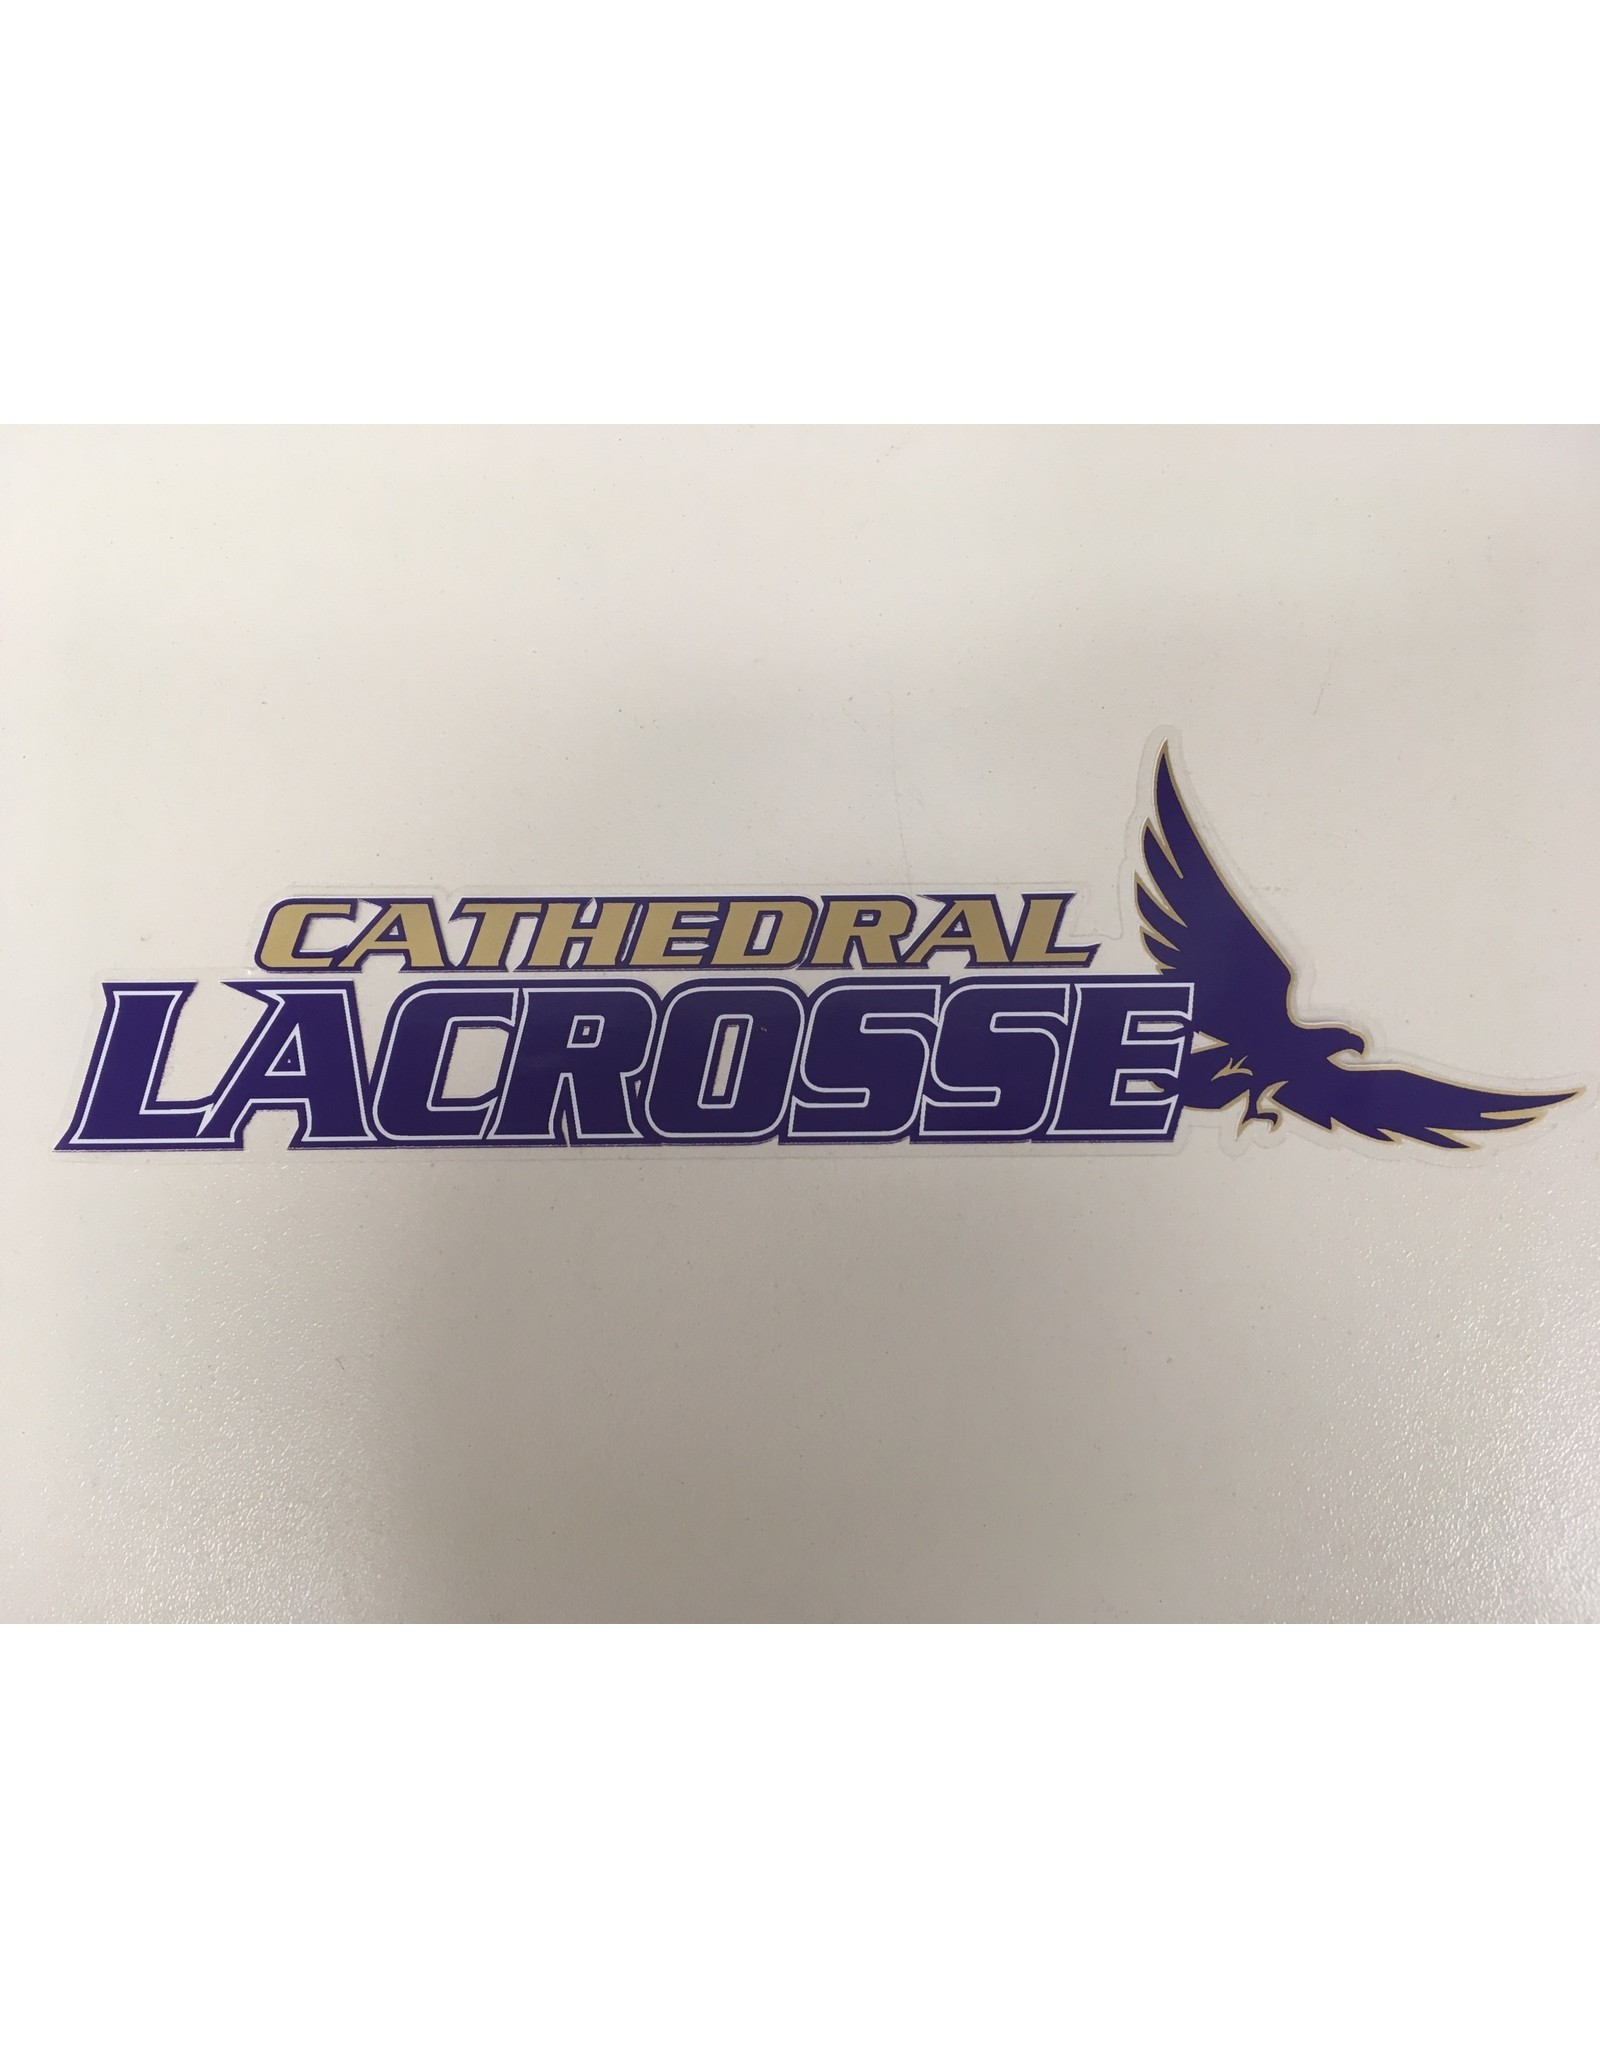 DECAL-CATHEDRAL SPORTS